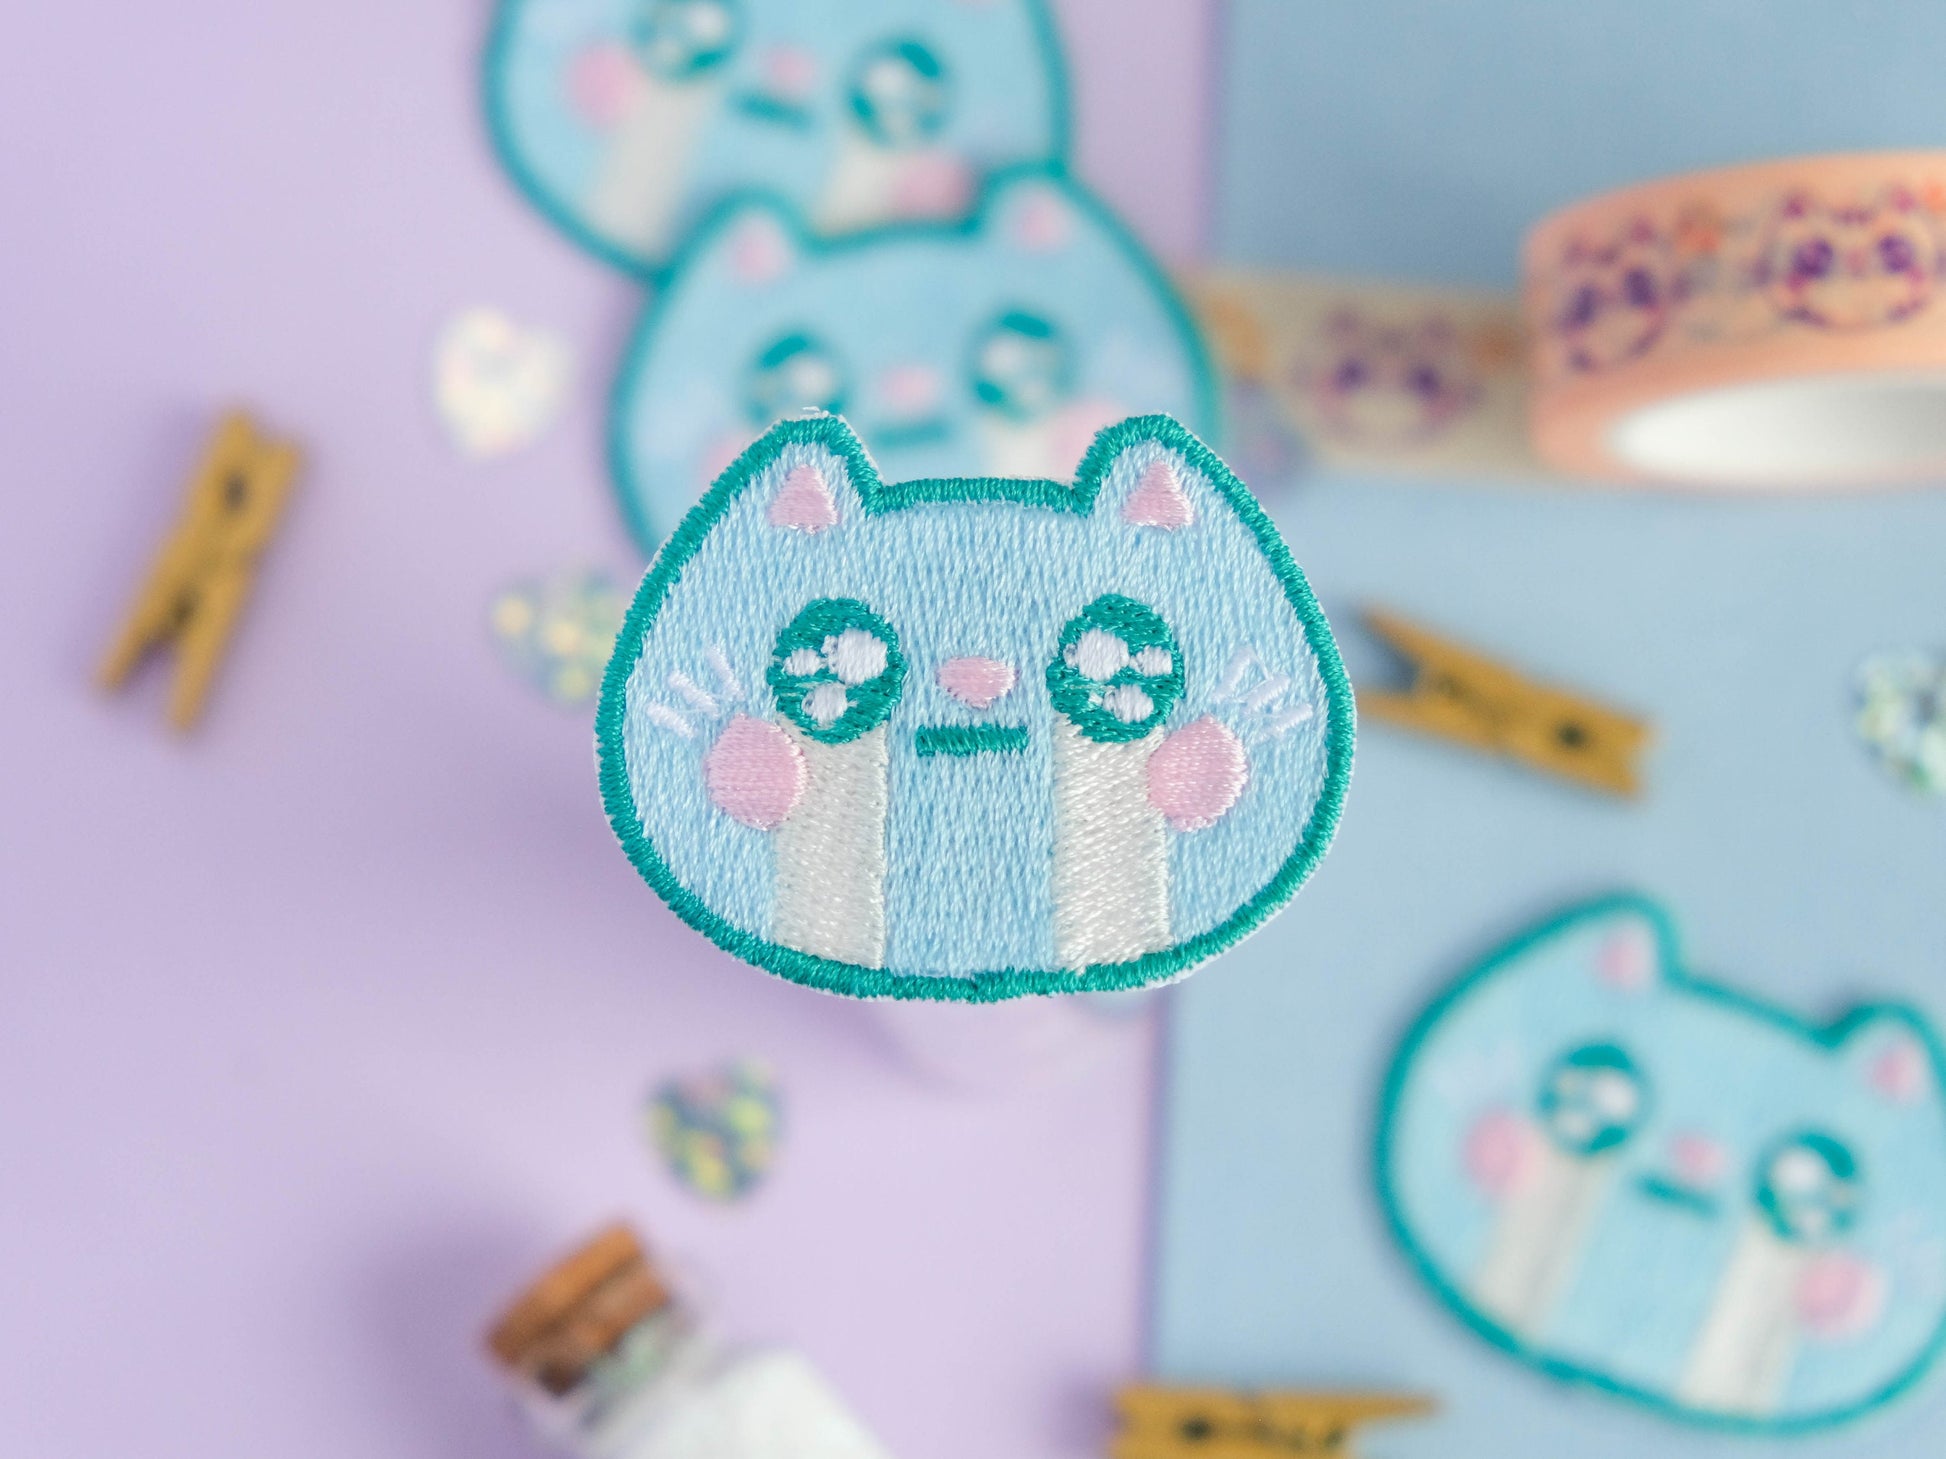 Cute patch iron-on embroidery cute blue cat with tears to decorate jackets and jeans